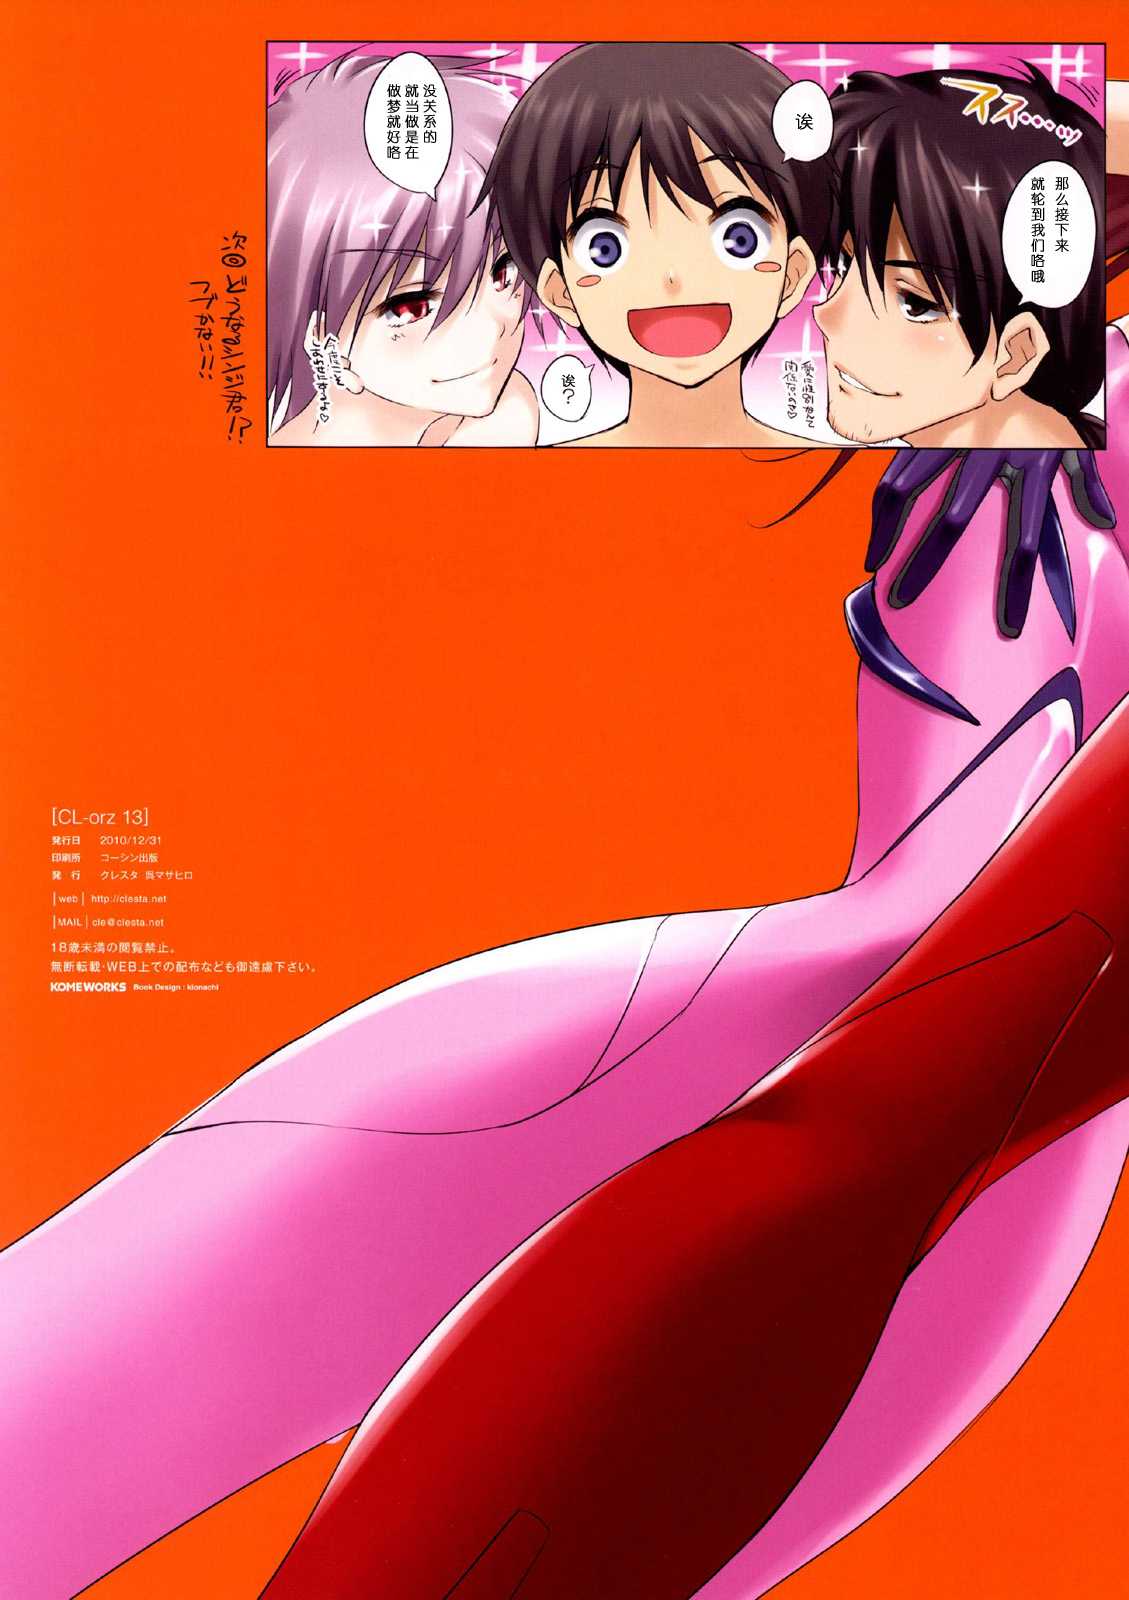 (C79) [clesta (Cle Masahiro)] CL-orz 13 (Neon Genesis Evangelion) [Chinese] (C79) [クレスタ (呉マサヒロ)] CL-orz 13 (新世紀エヴァンゲリオン) [刻痕汉化组]